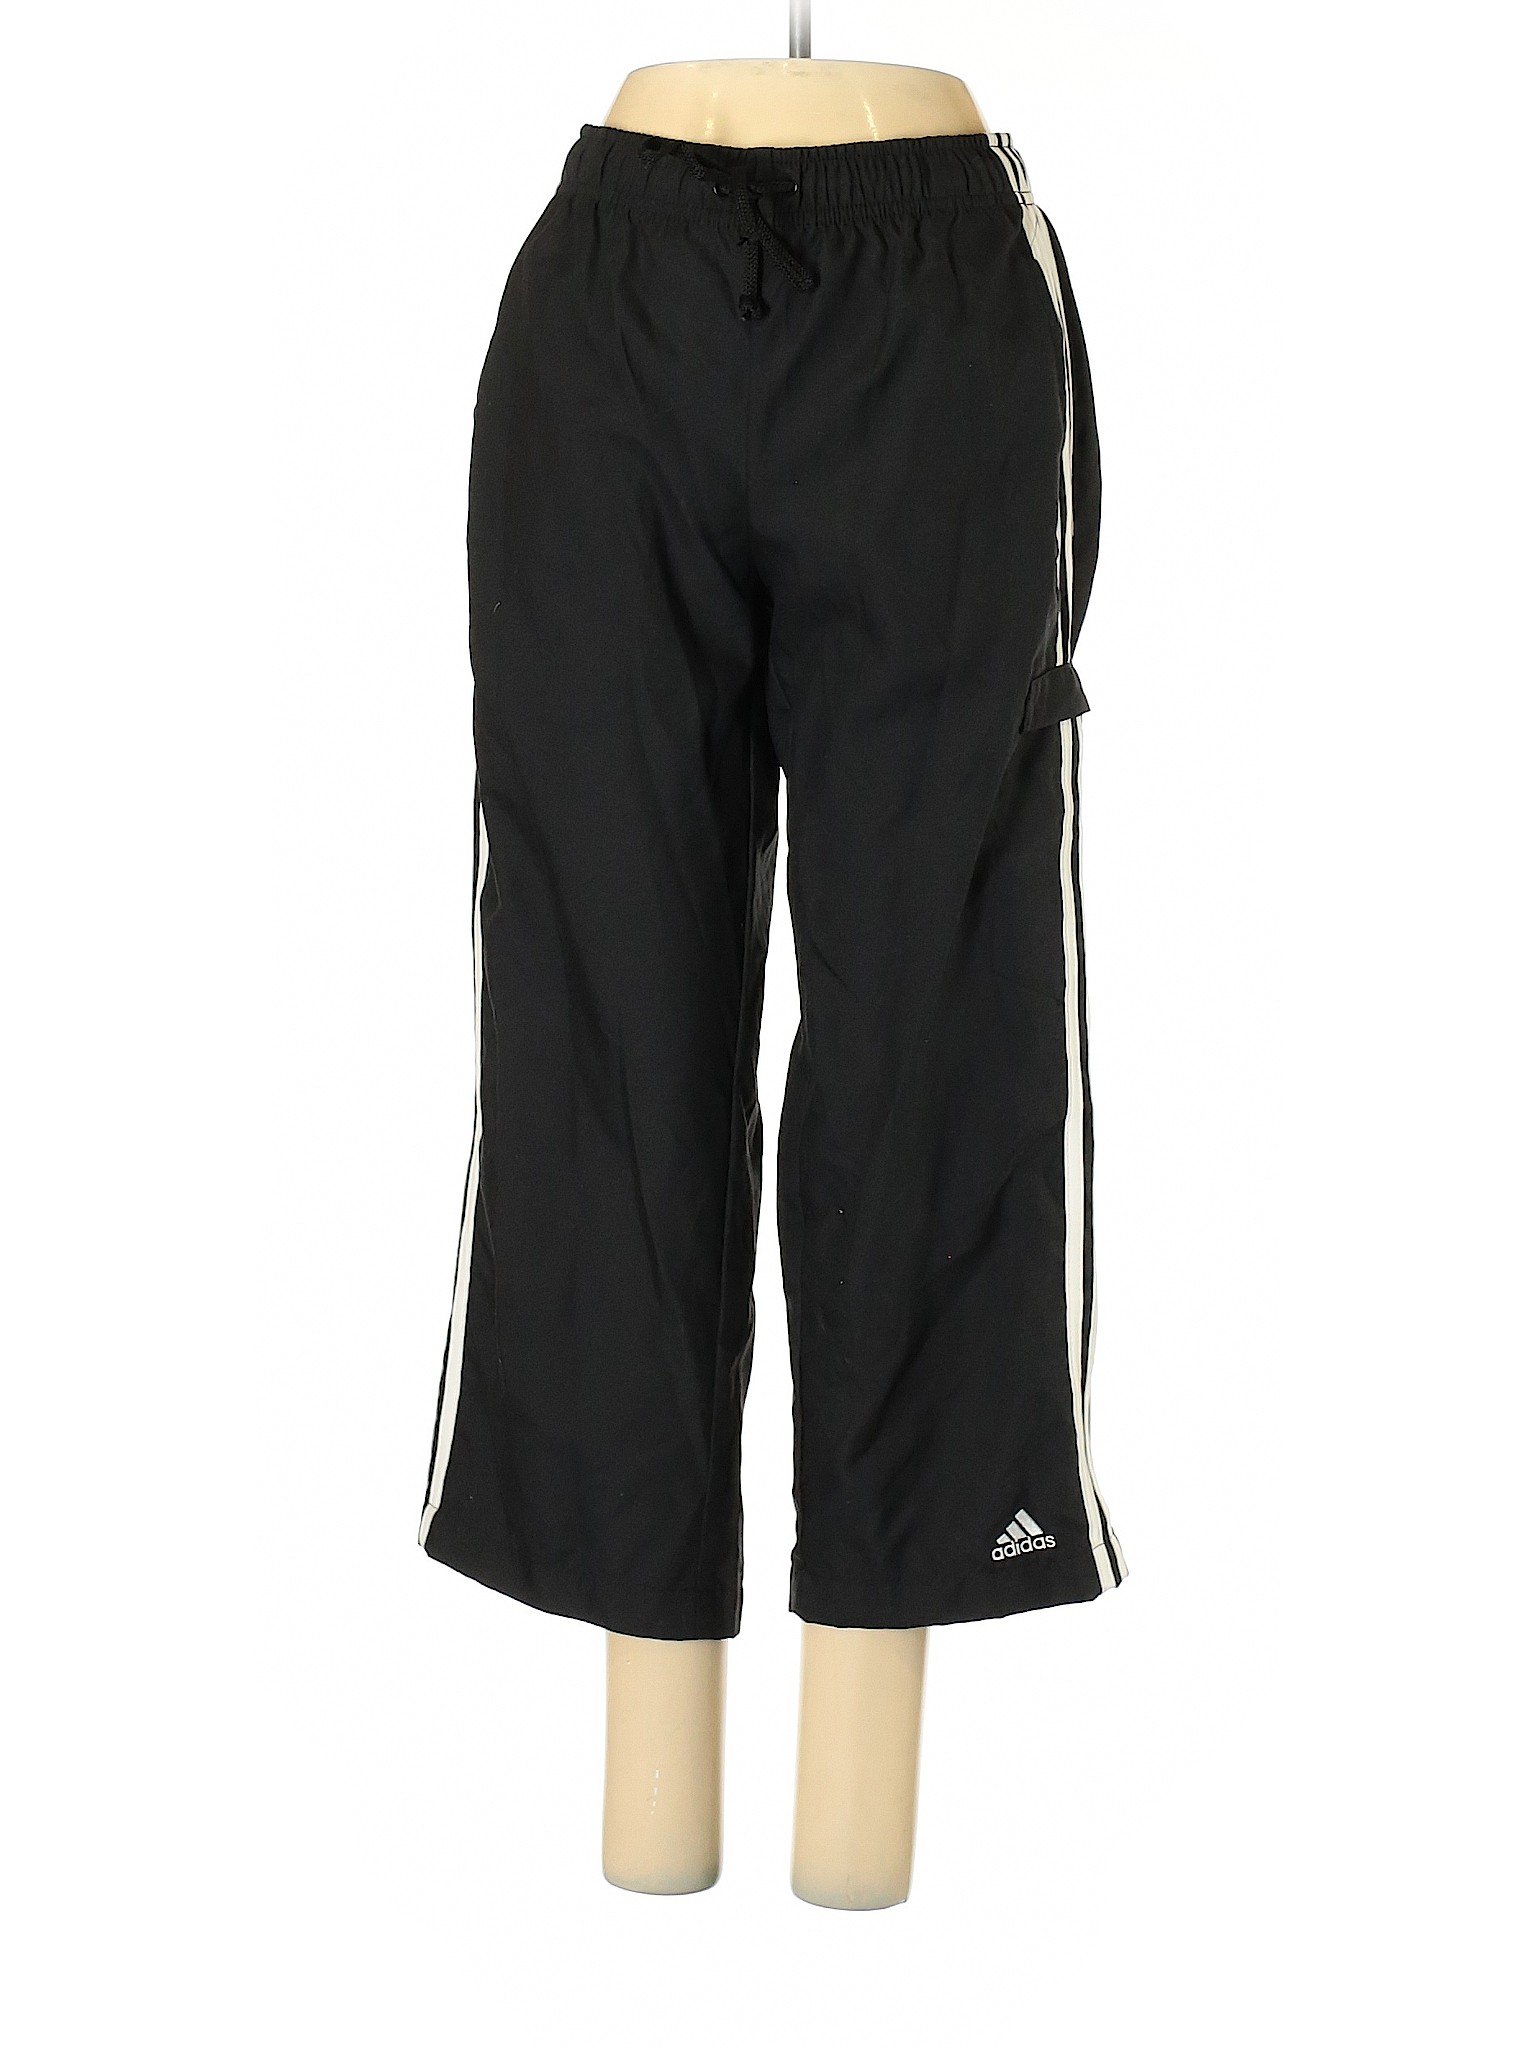 Adidas 100% Polyester Solid Black Track Pants Size XS - 78% off | thredUP